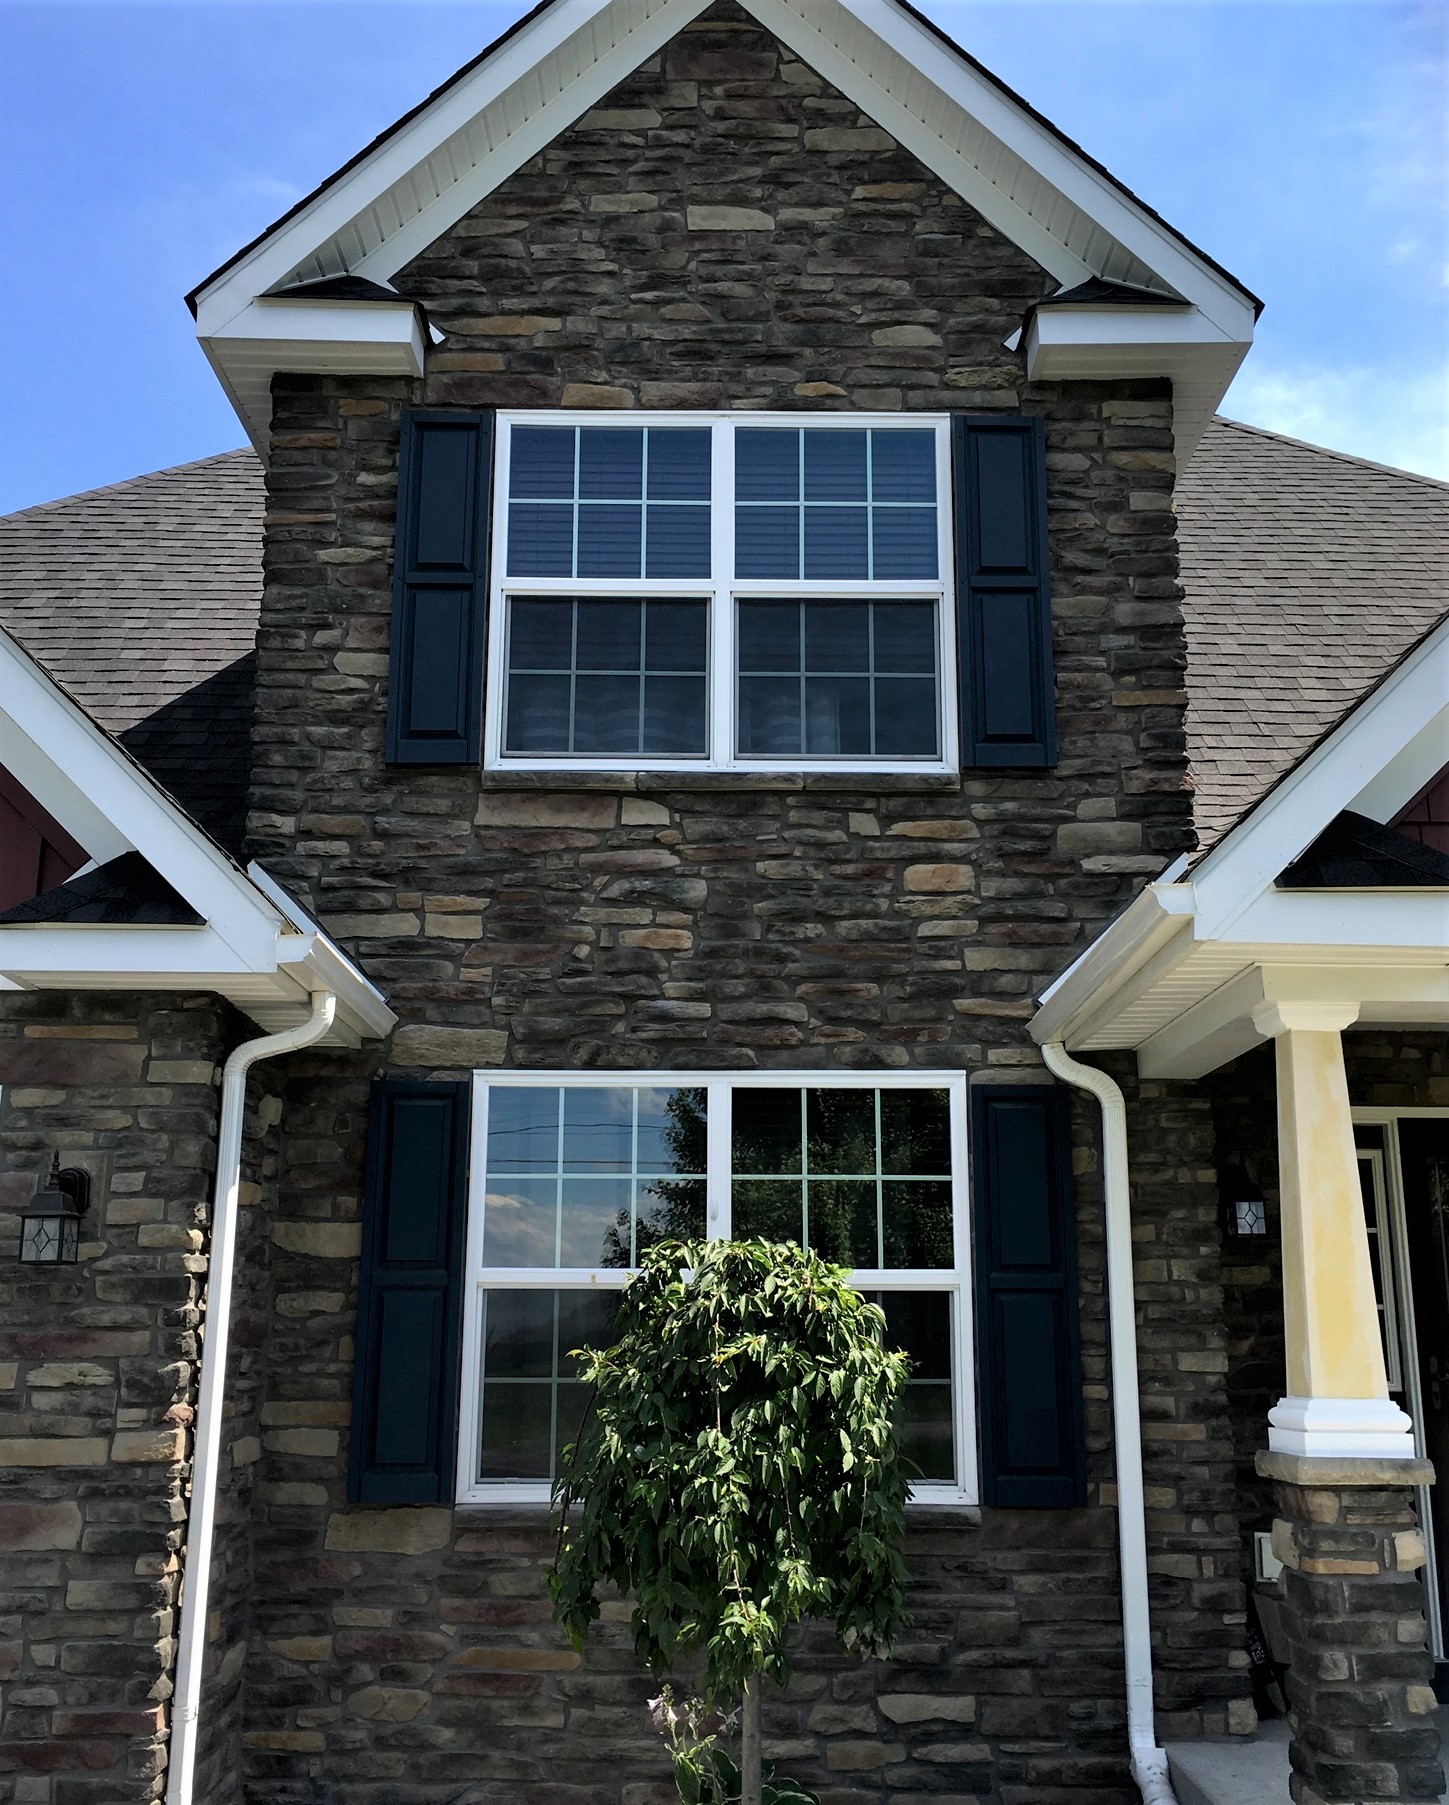 The stone exterior of a home with white windows with black shutters